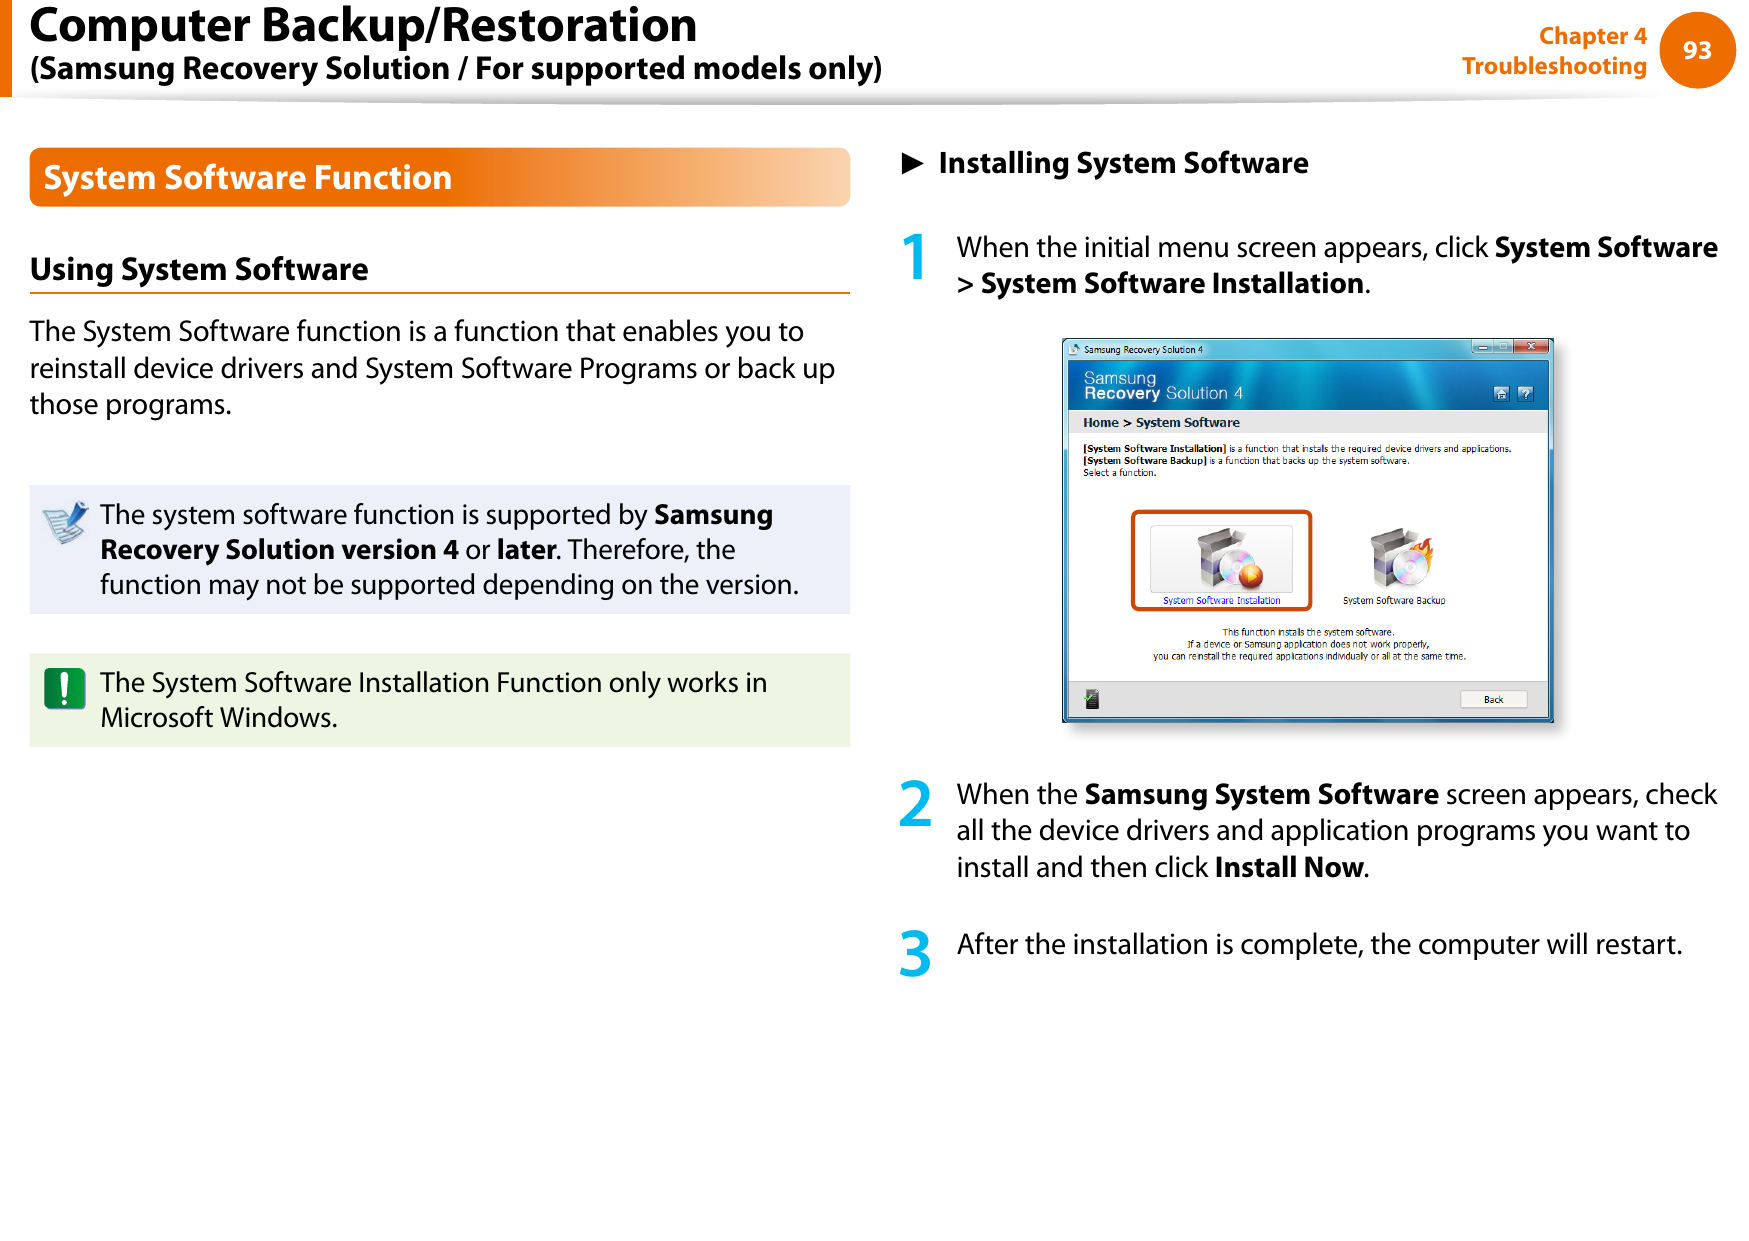 9293Chapter 4 TroubleshootingSystem Software FunctionUsing System SoftwareThe System Software function is a function that enables you to reinstall device drivers and System Software Programs or back up those programs. The system software function is supported by Samsung Recovery Solution version 4 or later. Therefore, the function may not be supported depending on the version.The System Software Installation Function only works in Microsoft Windows.► Installing System Software1  When the initial menu screen appears, click System Software &gt; System Software Installation.2  When the Samsung System Software screen appears, check all the device drivers and application programs you want to install and then click Install Now.3  After the installation is complete, the computer will restart.Computer Backup/Restoration  (Samsung Recovery Solution / For supported models only)